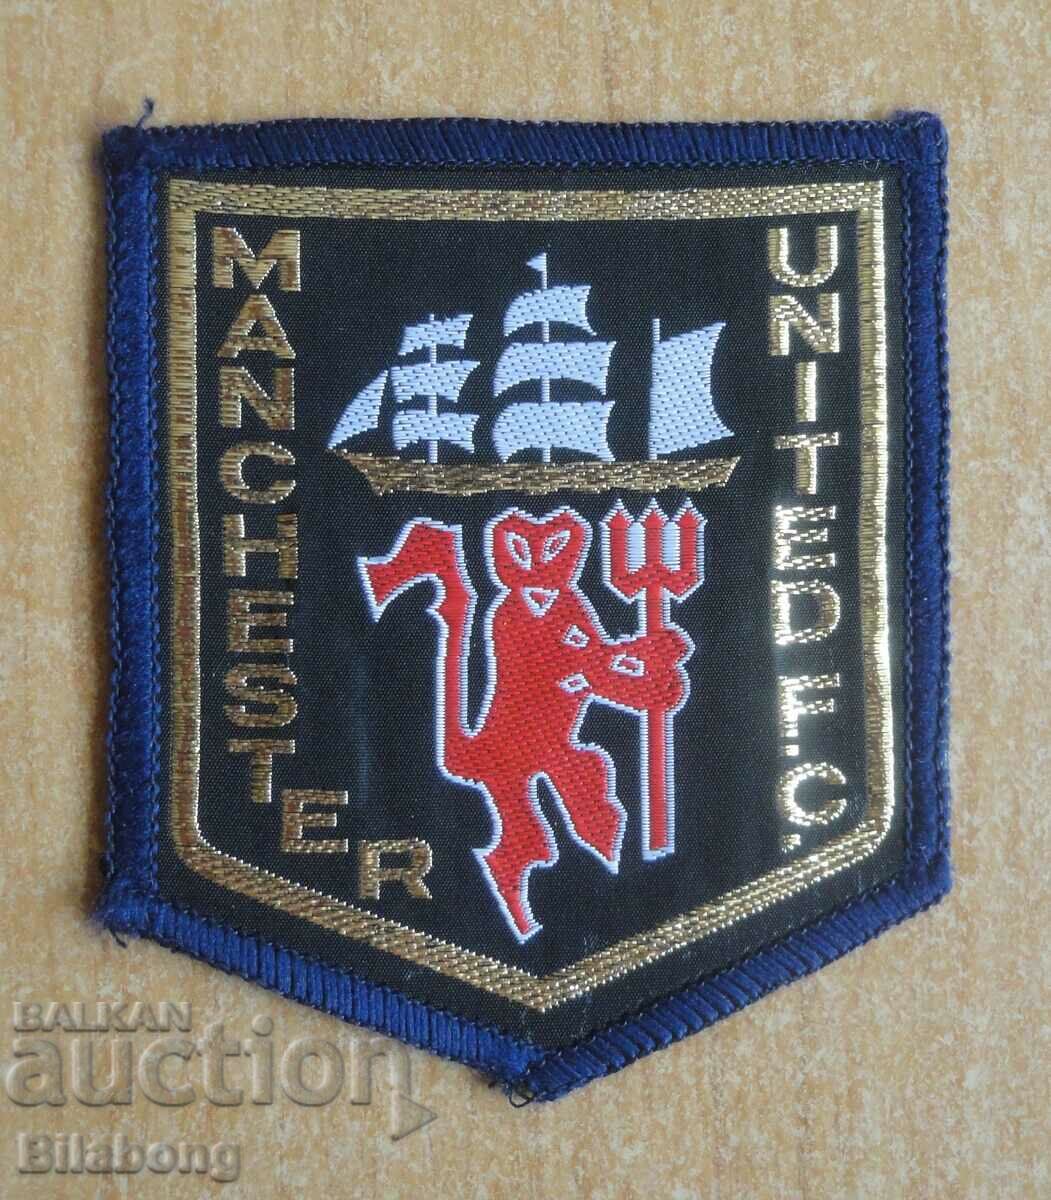 Manchester United Textile Patch.